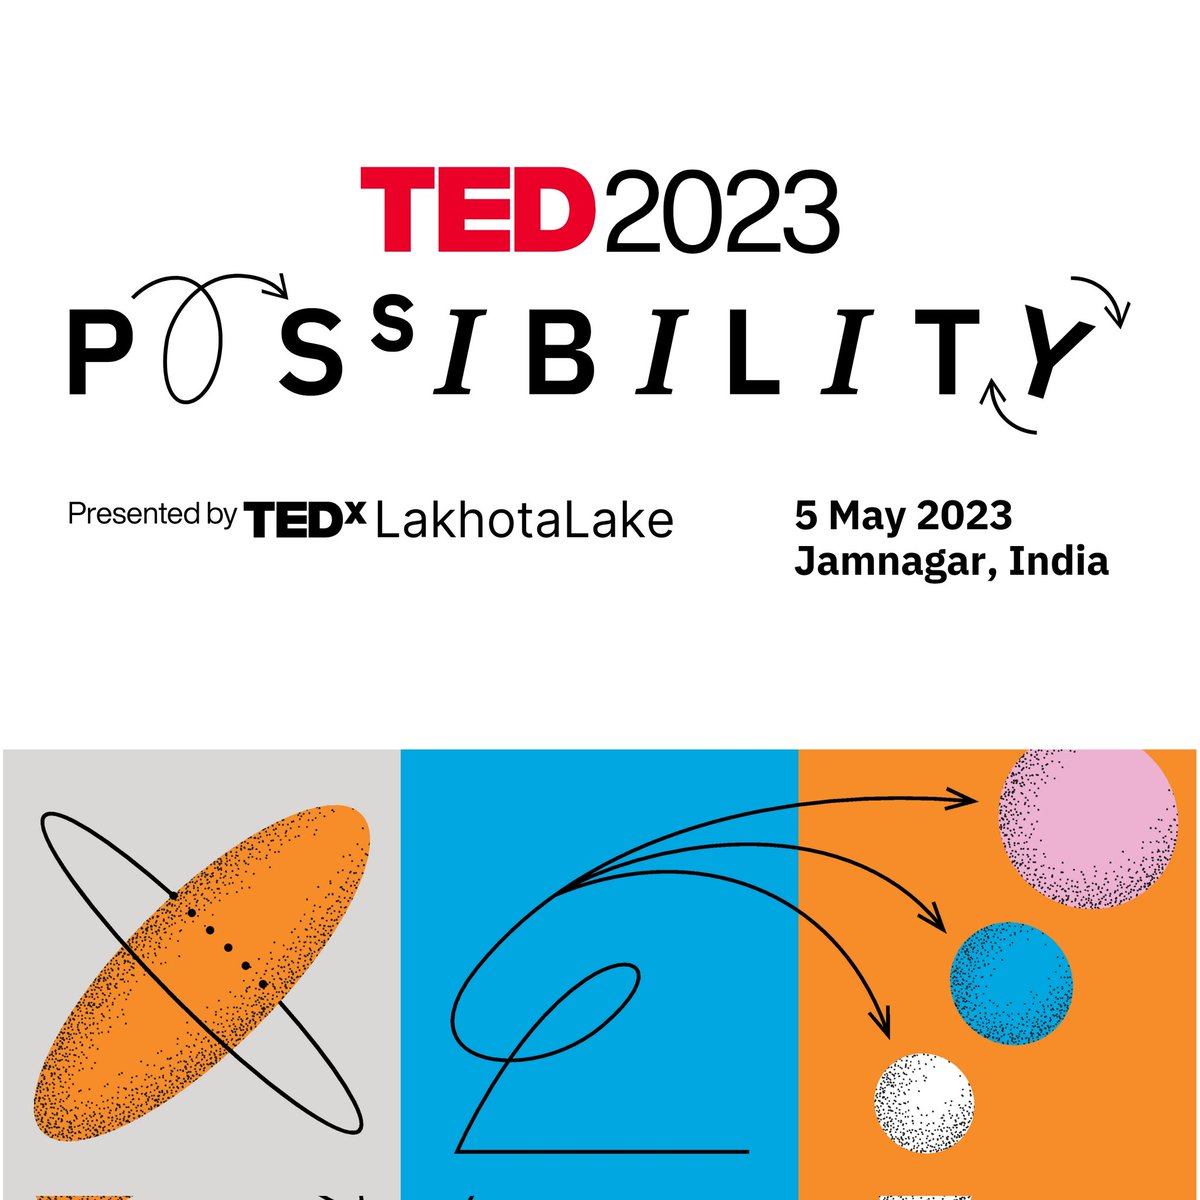 TED2023: Possibility

Presented by: TEDxLakhotaLake

🗓️ 5 May, 2023
📌 Jamnagar, INDIA

#TED #TEDxLakhotaLake #TEDxLive #POSSIBILITY